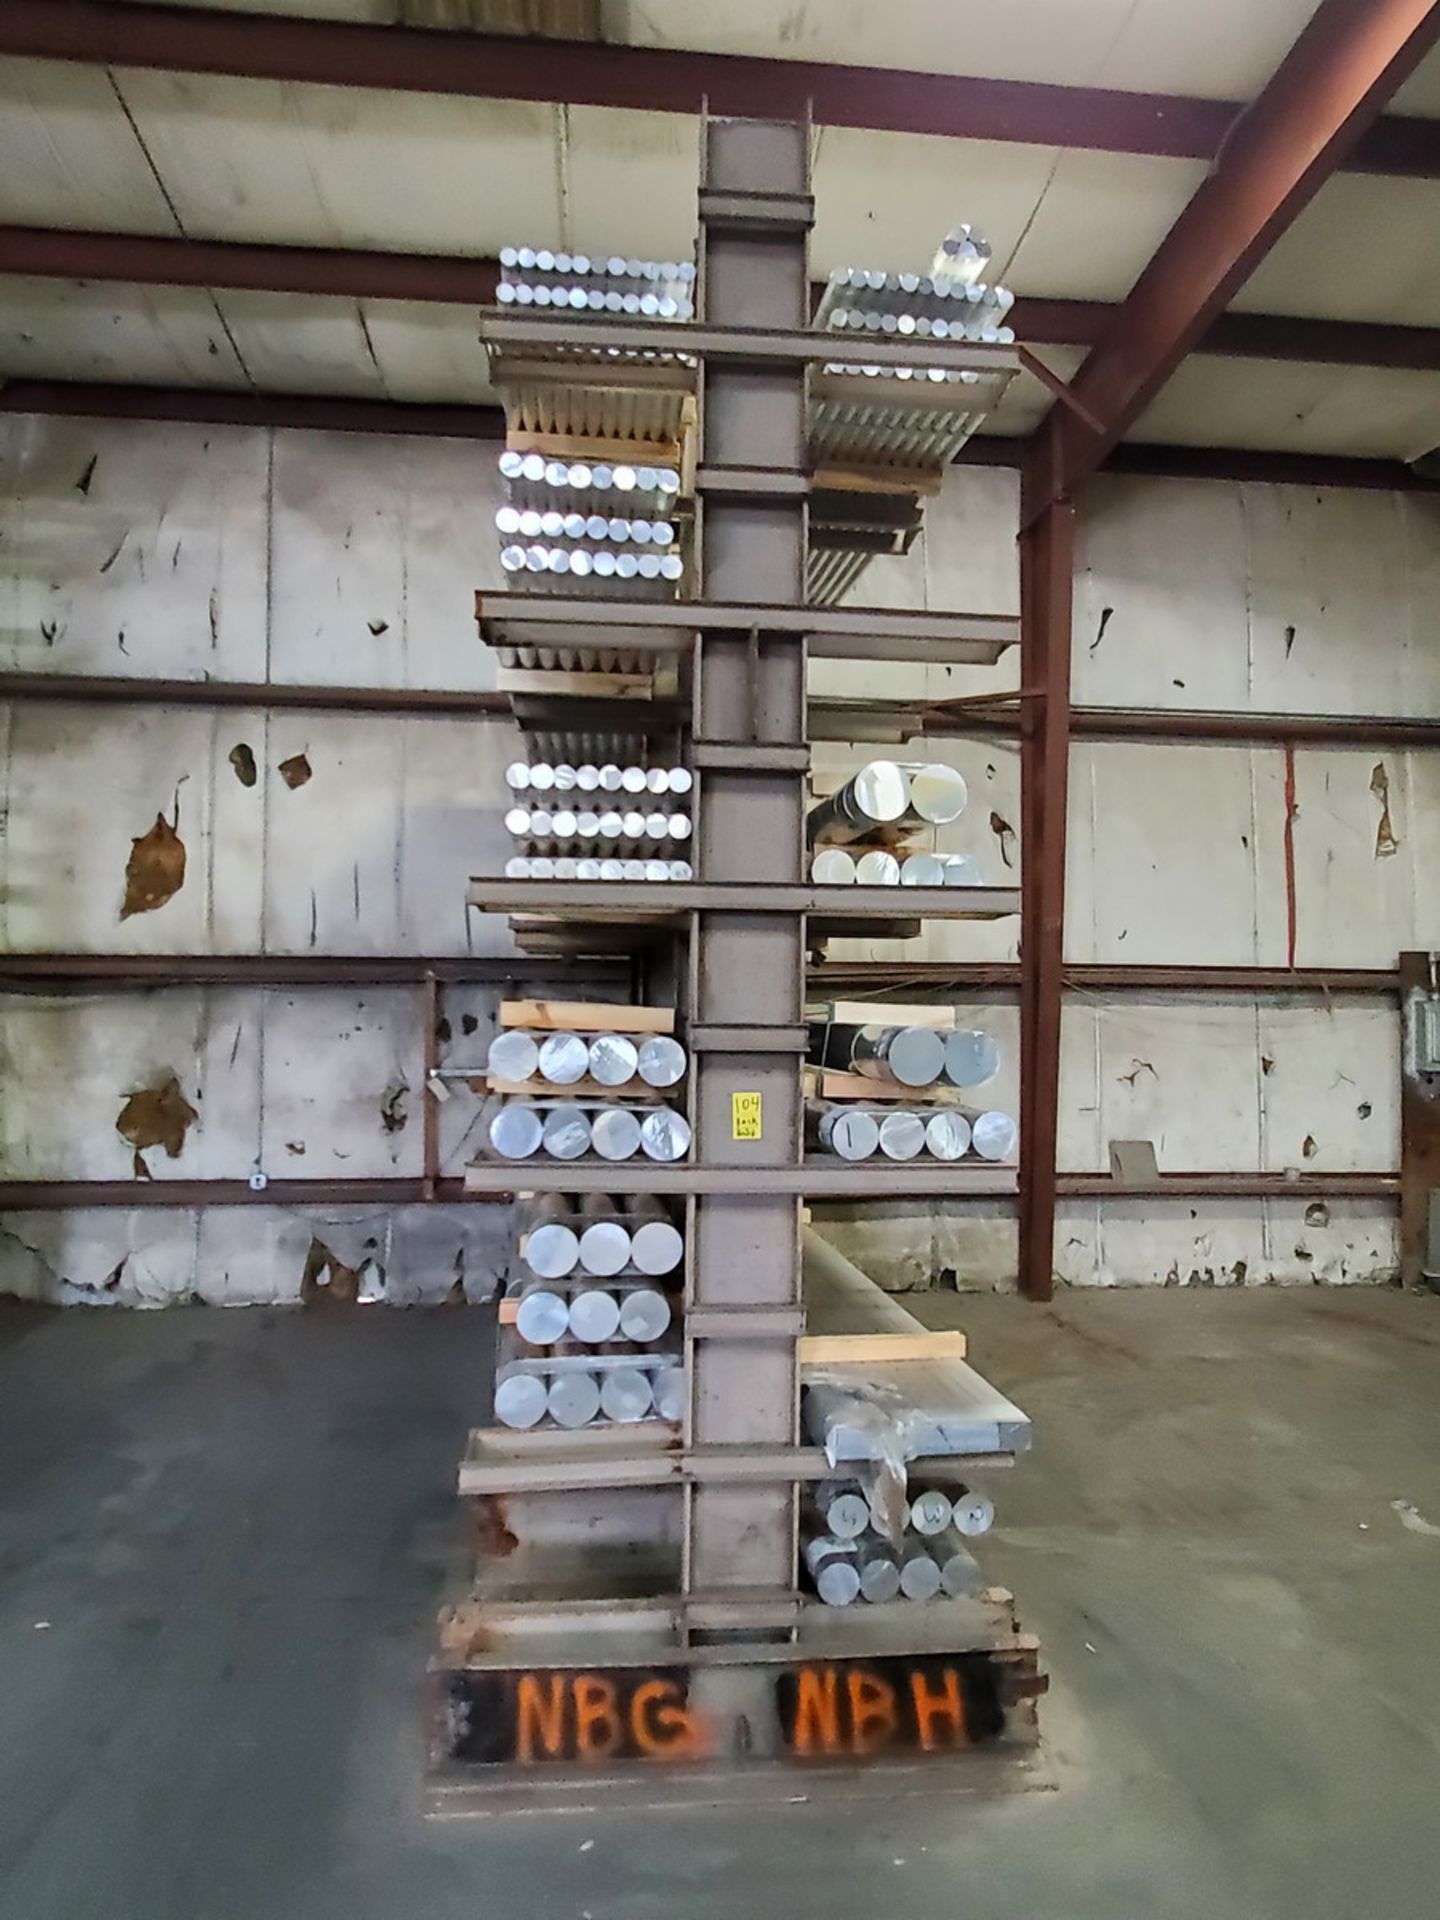 Double-Sided 4-Post Cantilever Rack 137" x 62" x 20'H Approx. 2' Deep (Raw Matl. Excluded) - Image 2 of 3